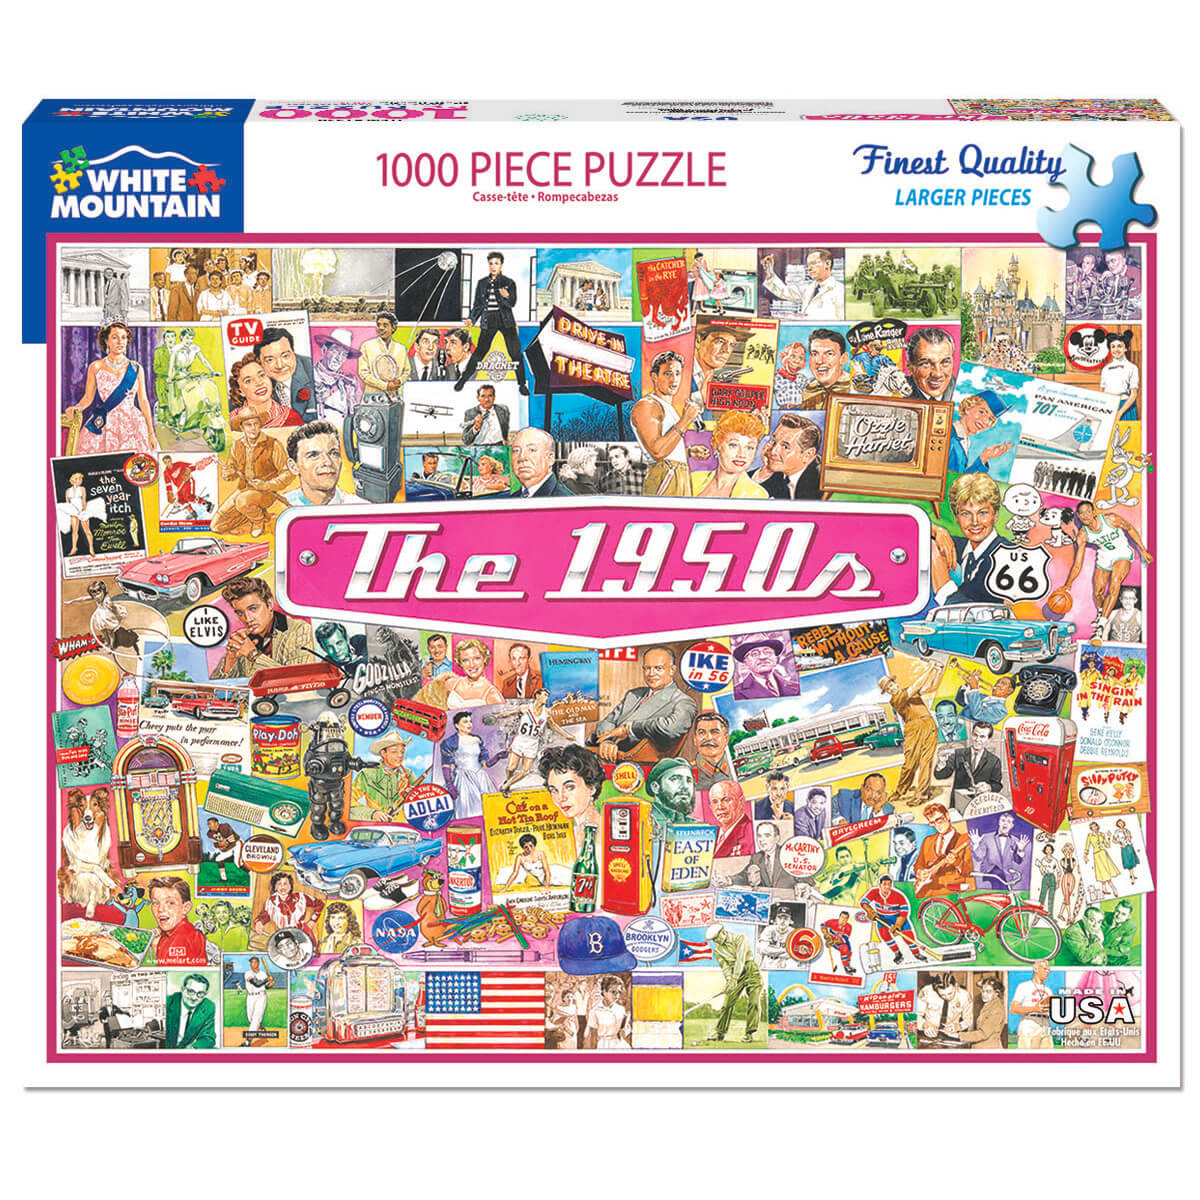 White Mountain Puzzles The 1950s 1000 Piece Jigsaw Puzzle